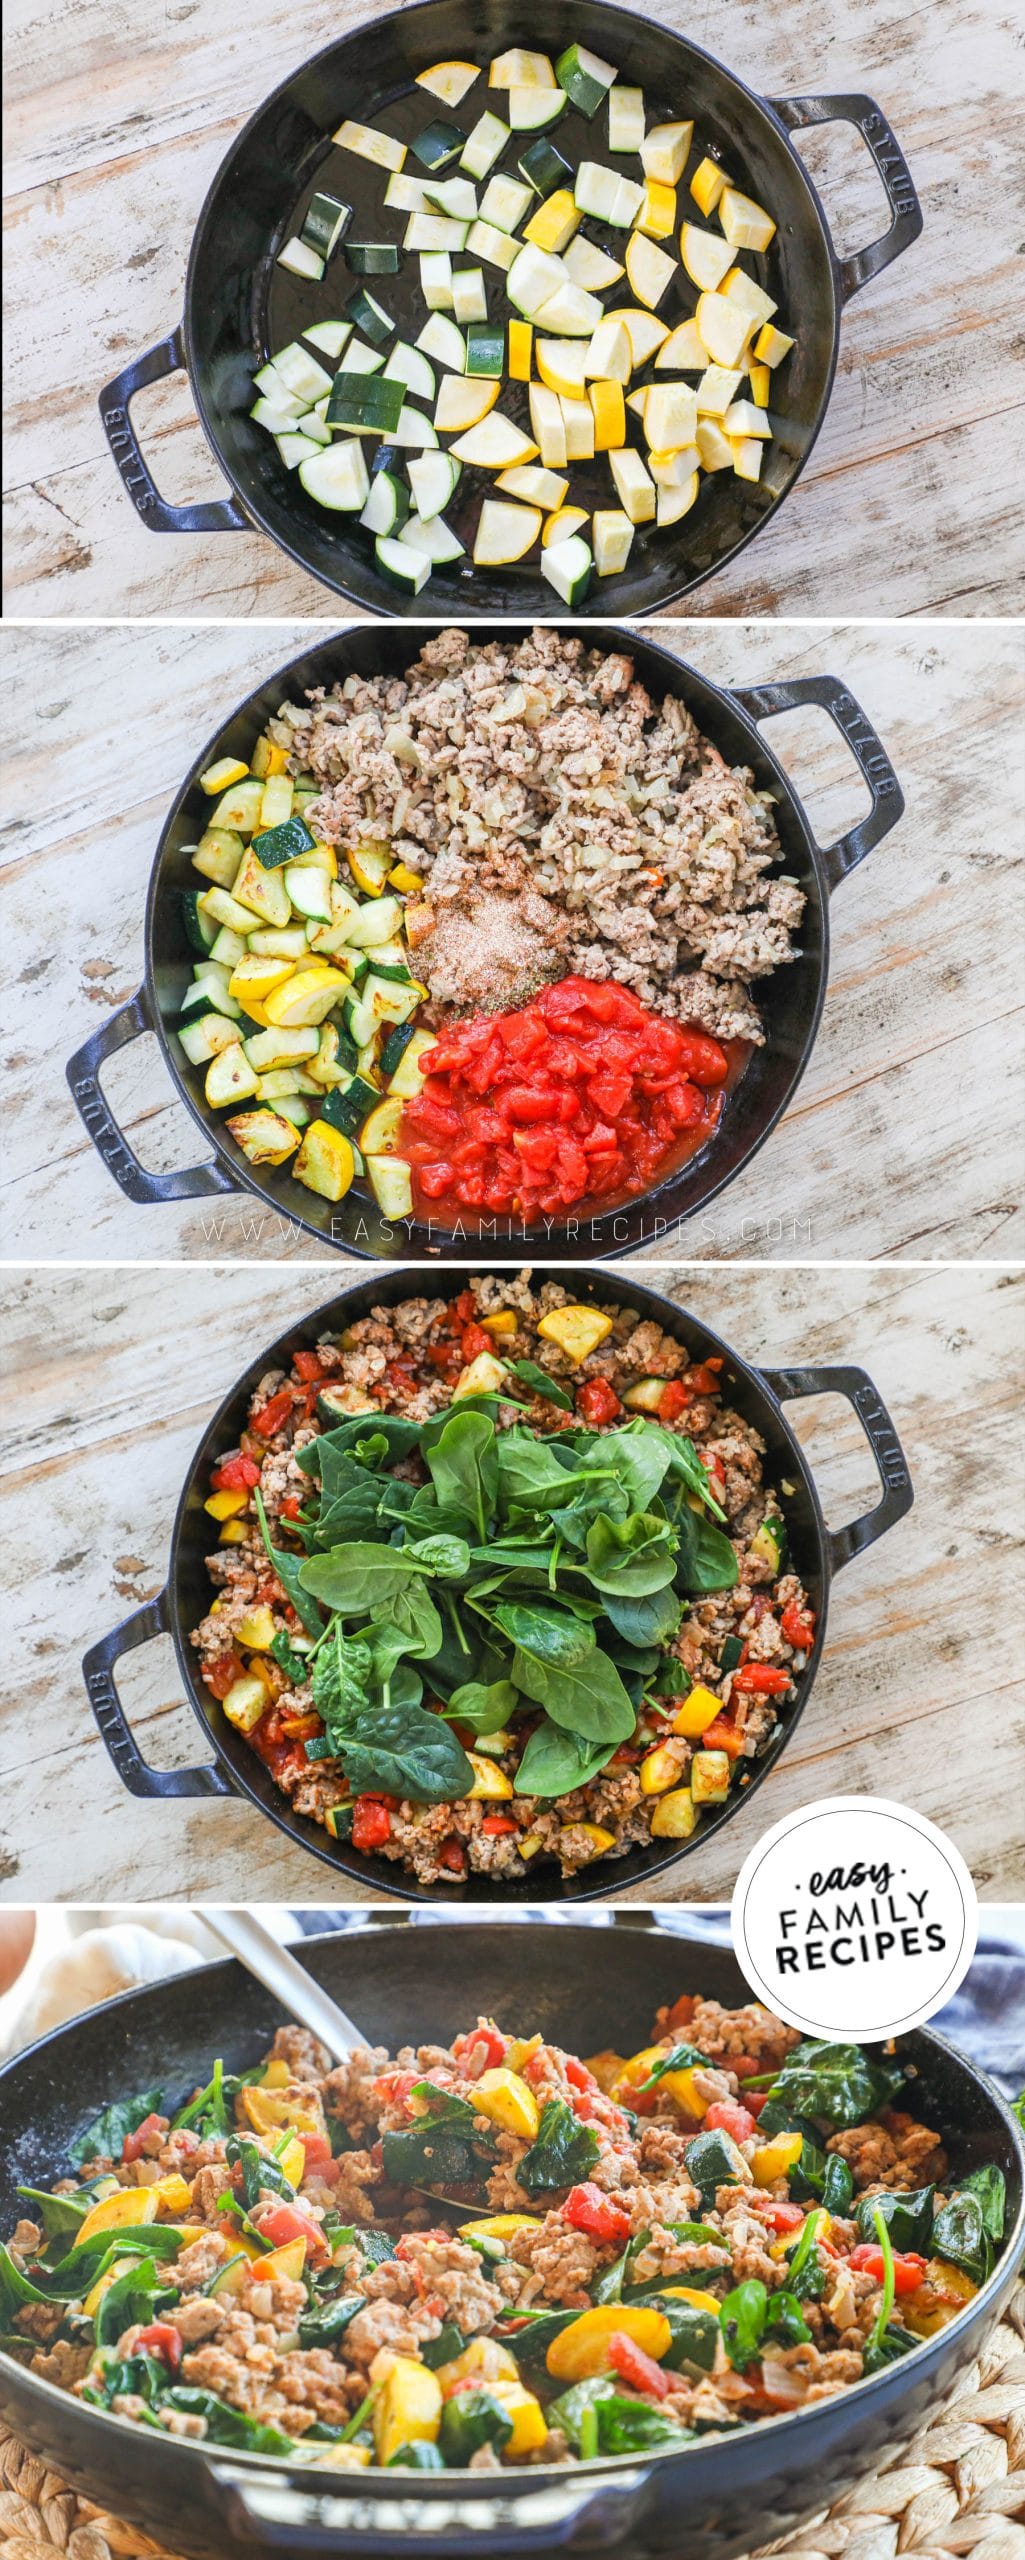 How to make a ground turkey skillet 1)sear the squash in a hot pan 2)brown the turkey and add seasonings and tomatoes 3)Add in the spinach 4)serve hot